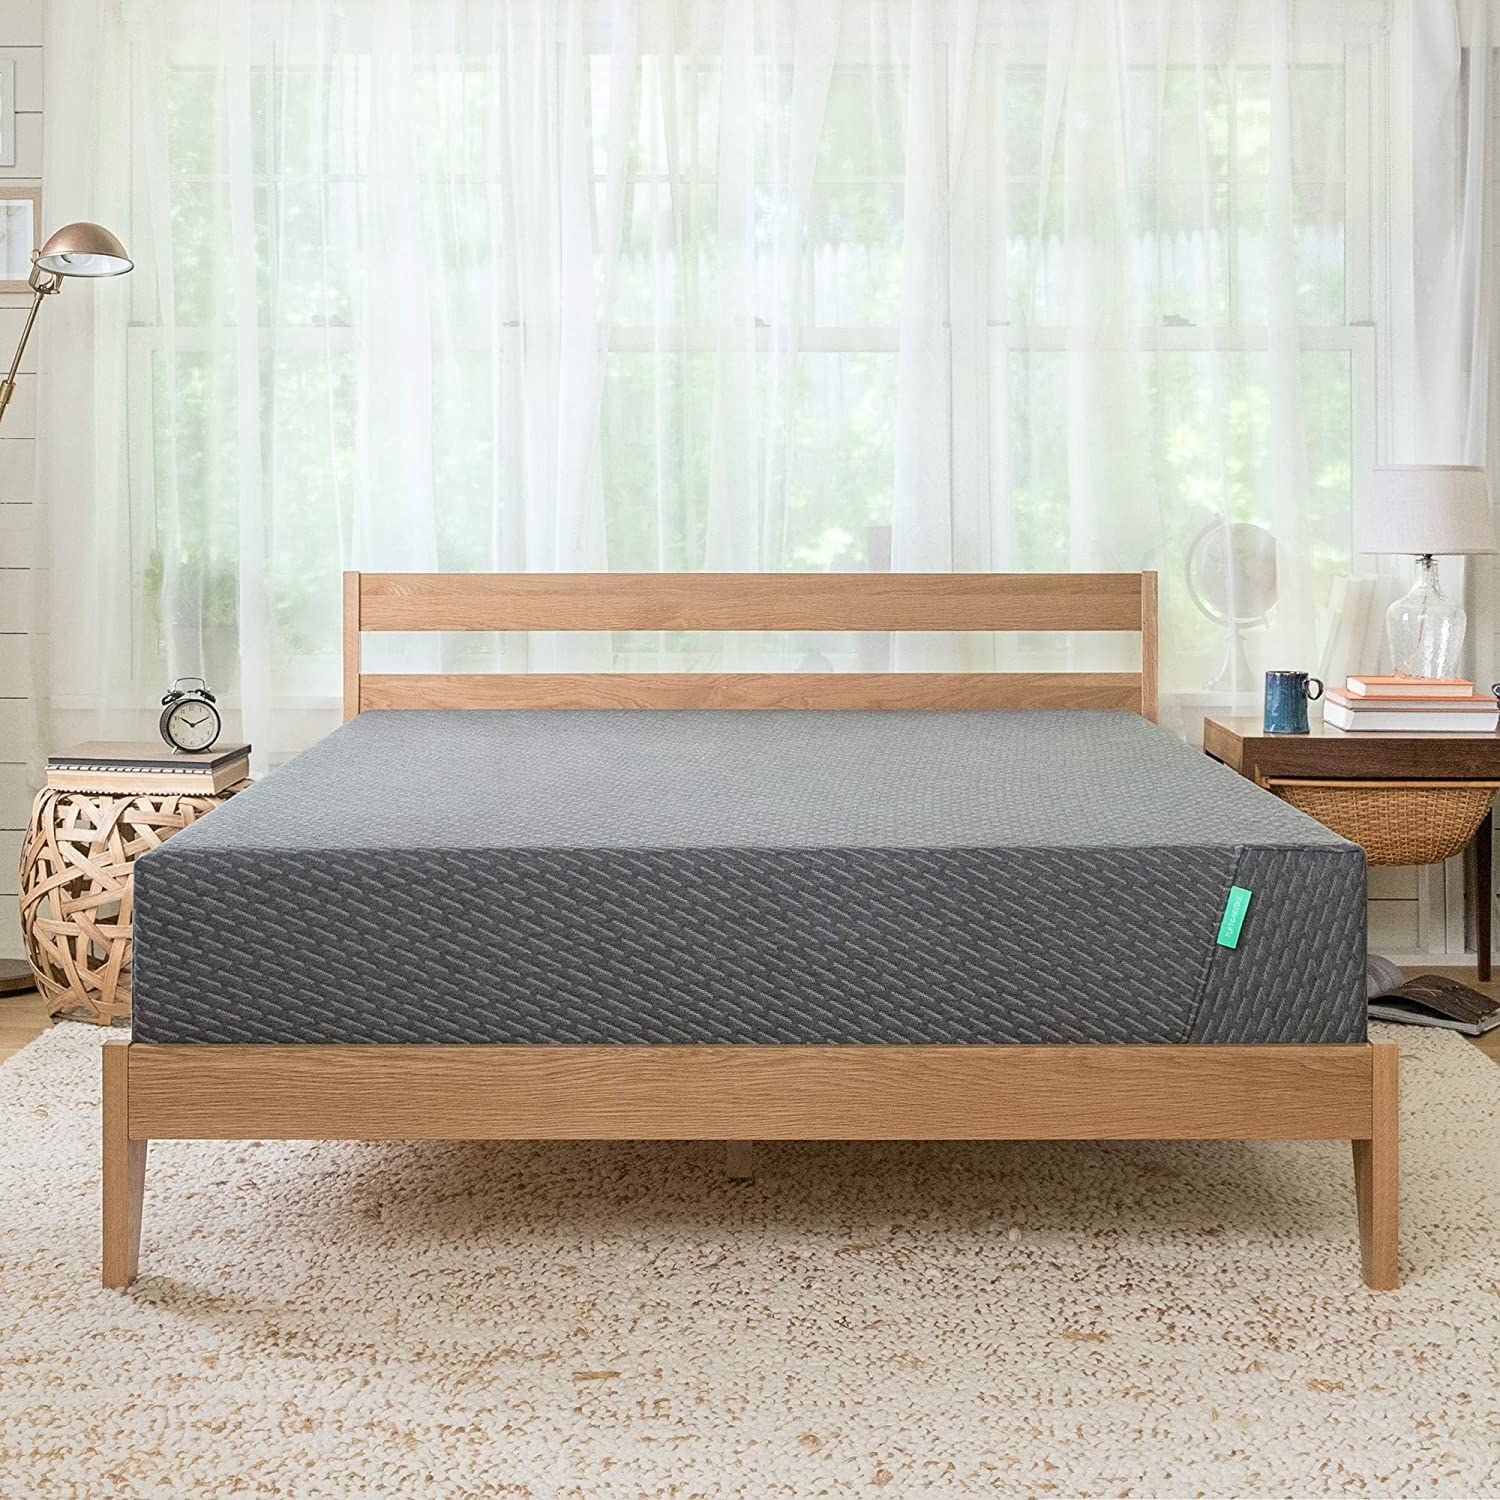 The mattress on a bed frame